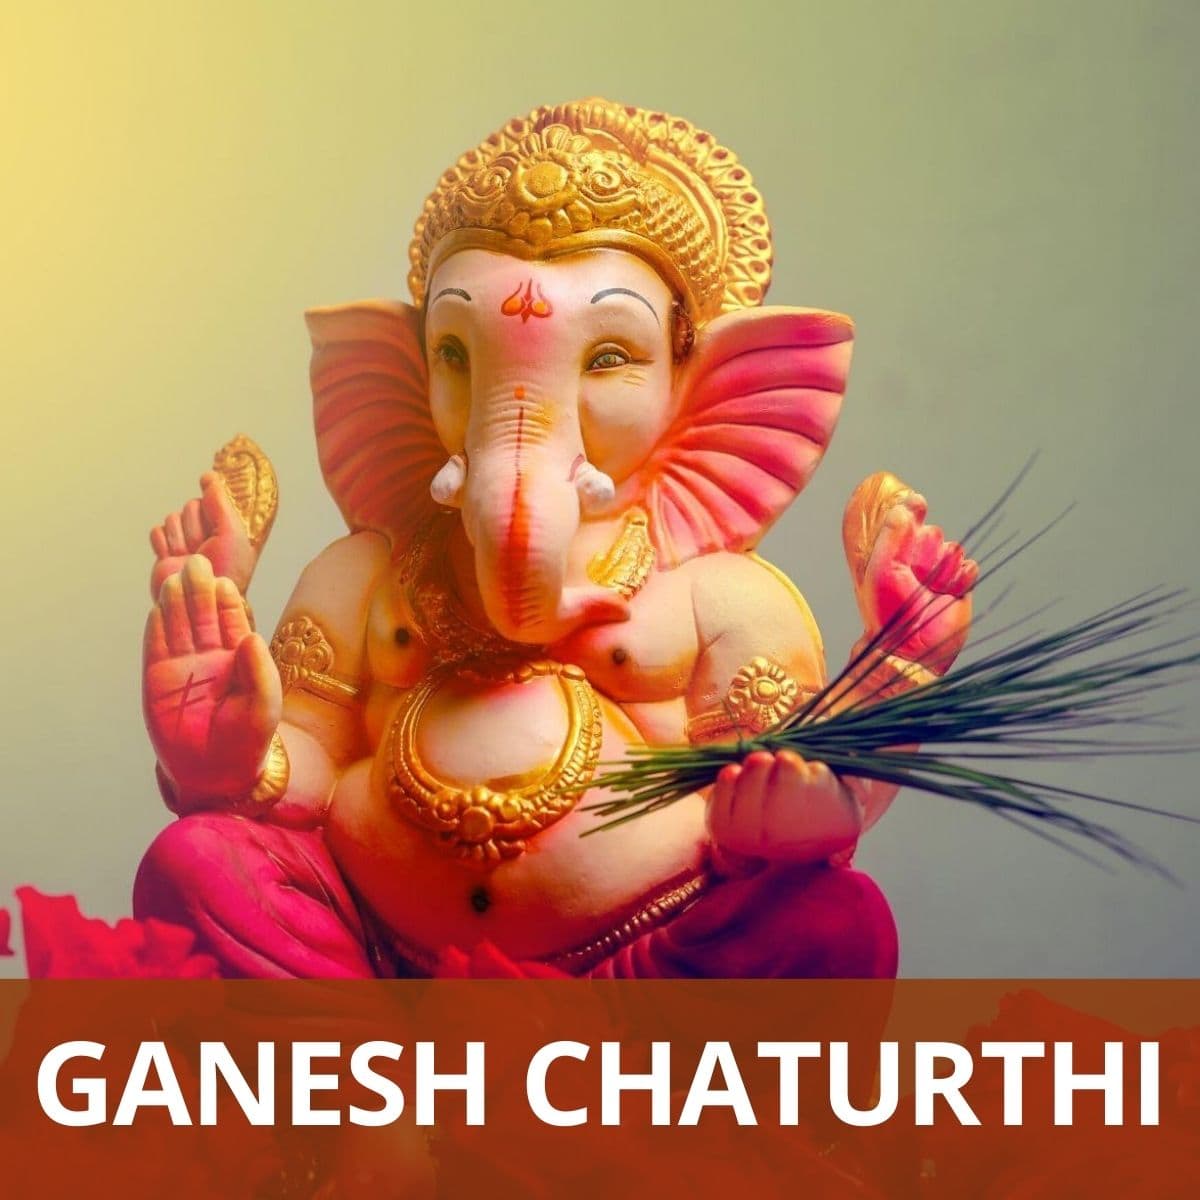 Ganesha Idol with text "ganesh chaturthi recipes" at the bottom with light red background